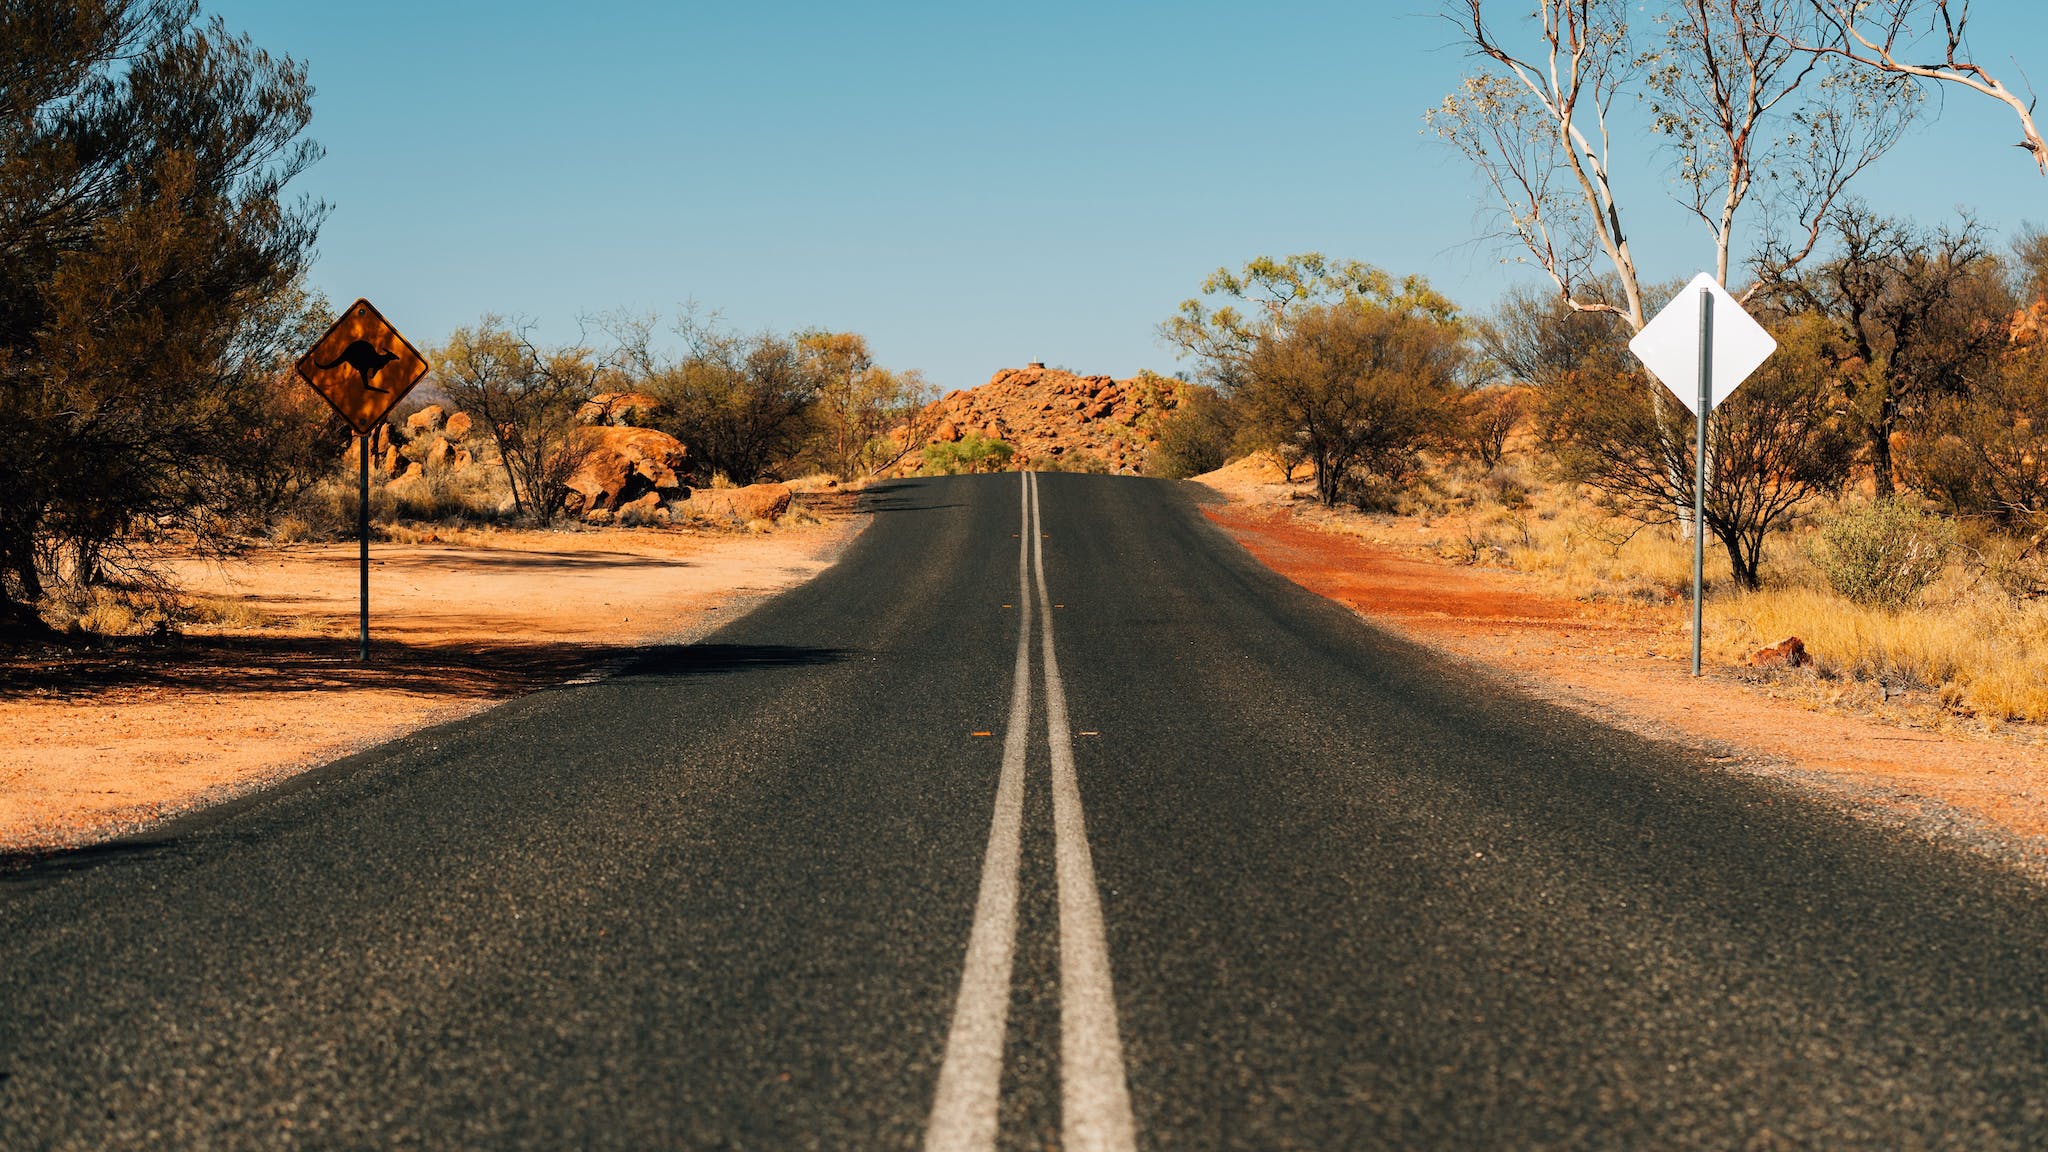 Outback road in the Northern Territory